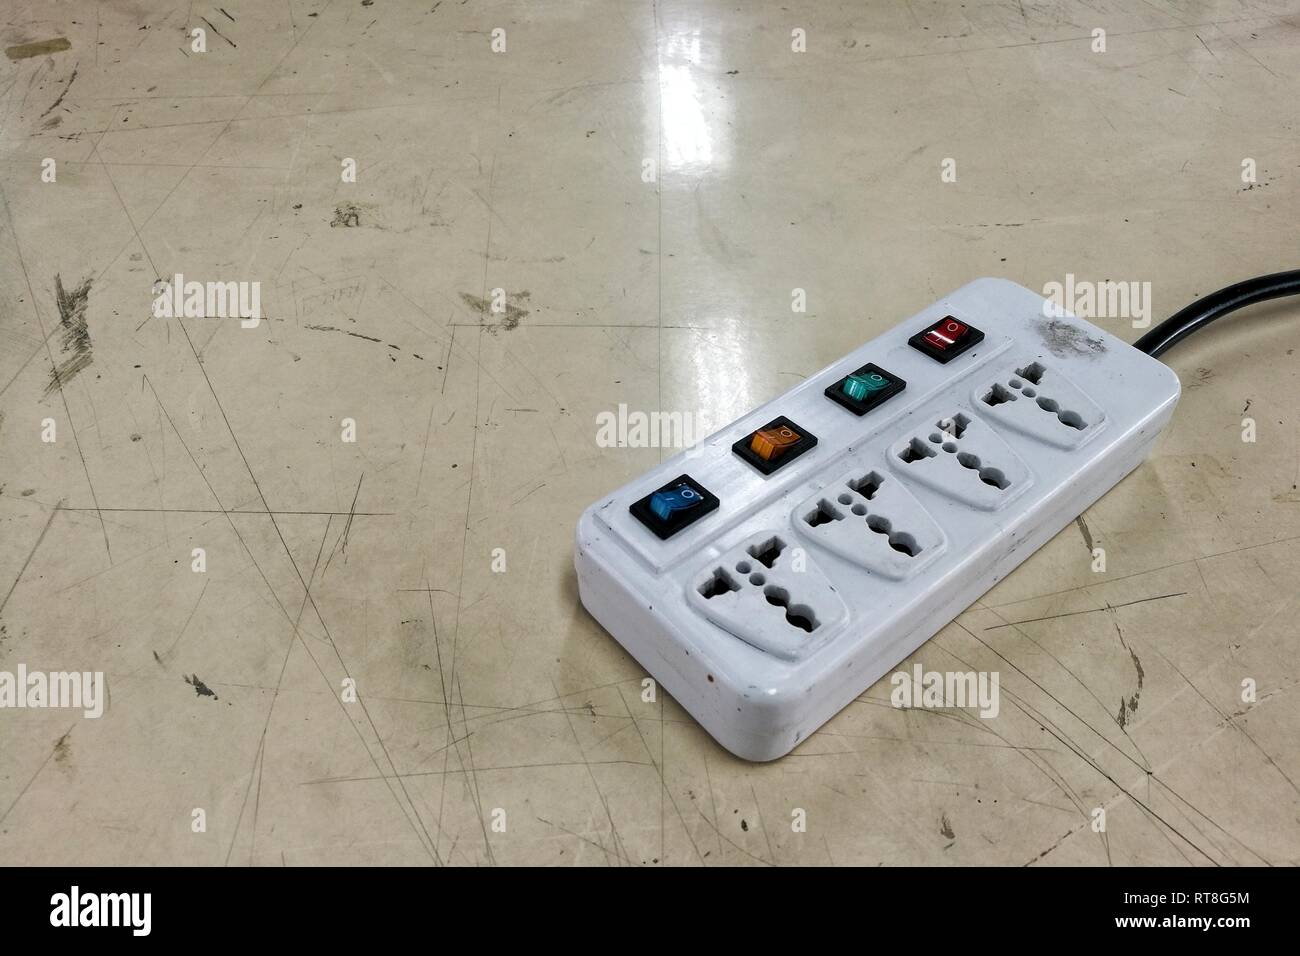 multiple socket plug. old movable electric plug with separate switch for each socket. Stock Photo